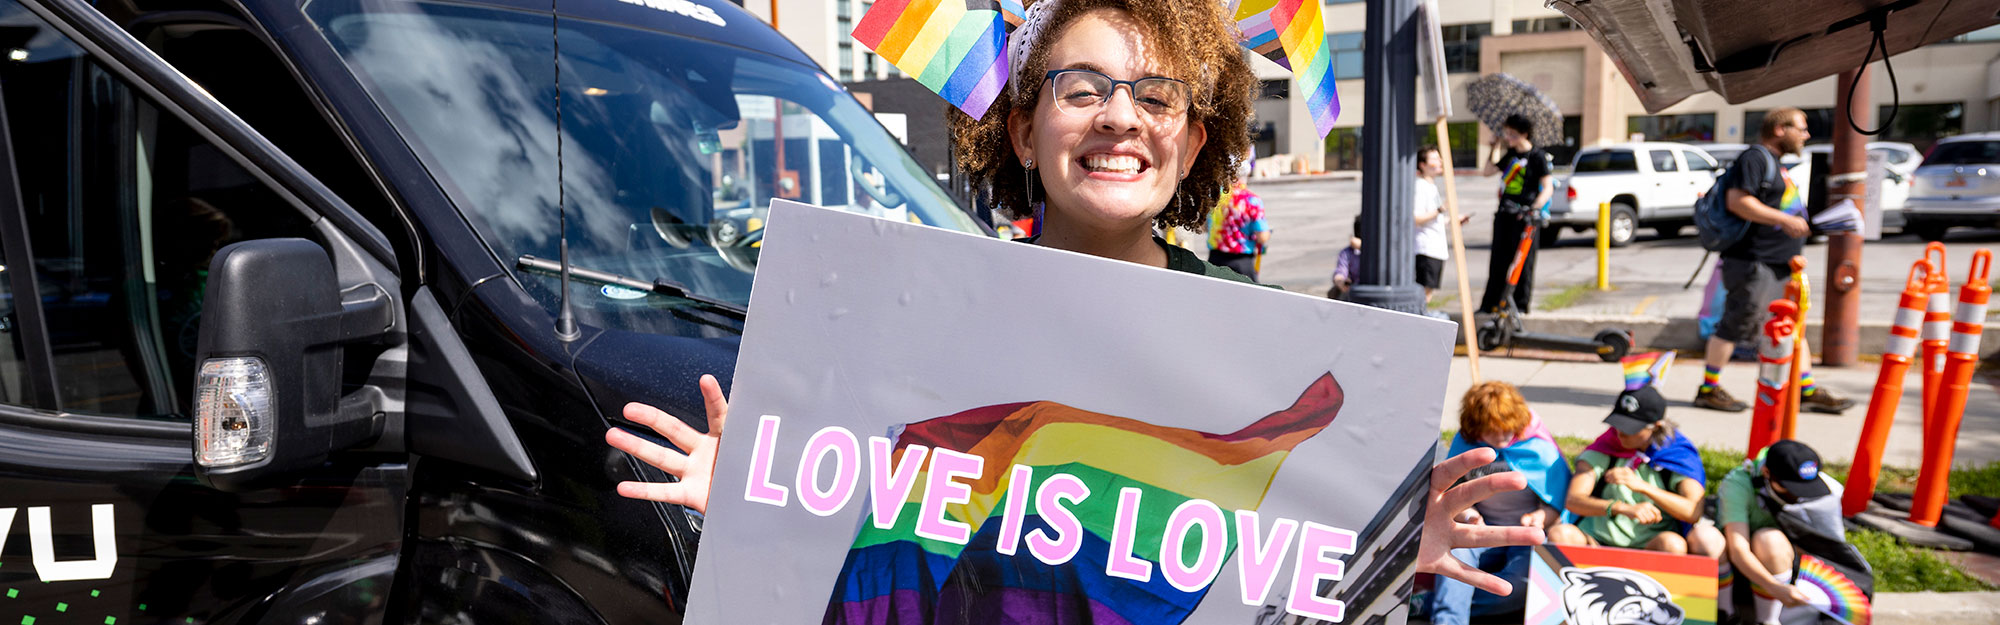 A woman holding a sign that says love is love, smiling at the camera.